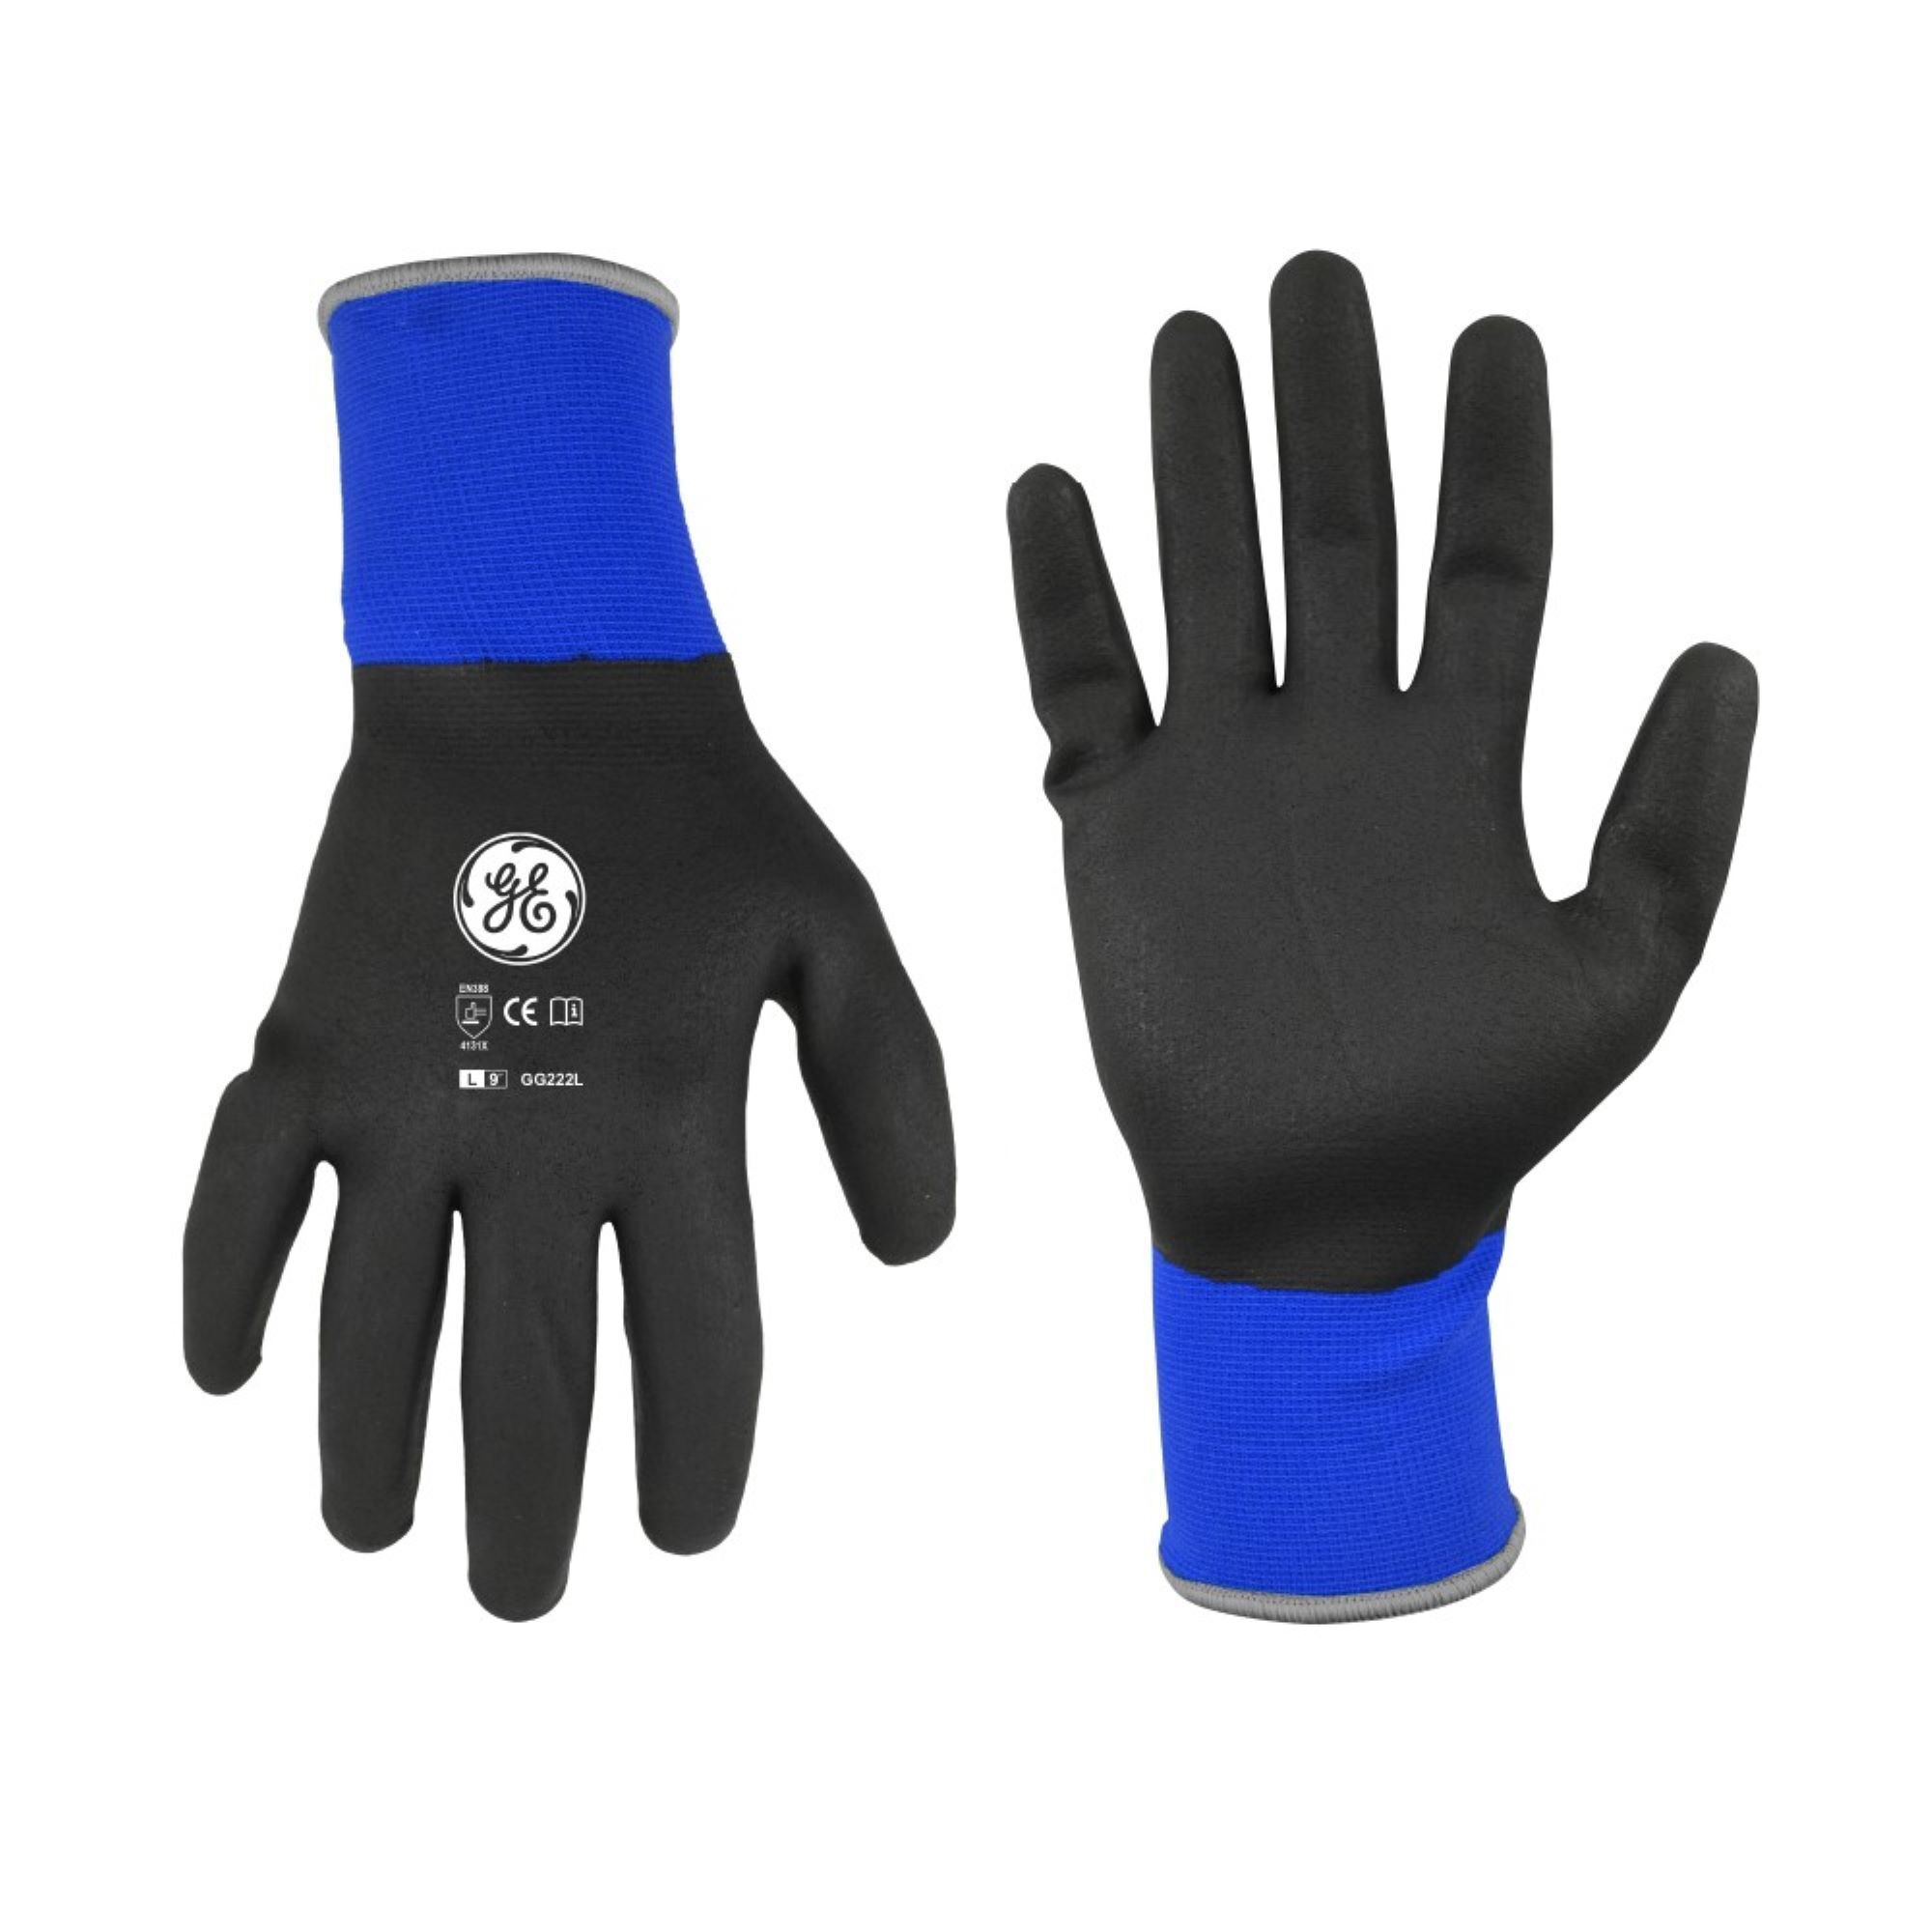 General Electric, L Foam Nitrile Black/Blue Dipped Gloves 12 Pairs, Size L, Included (qty.) 12, Model GG222L